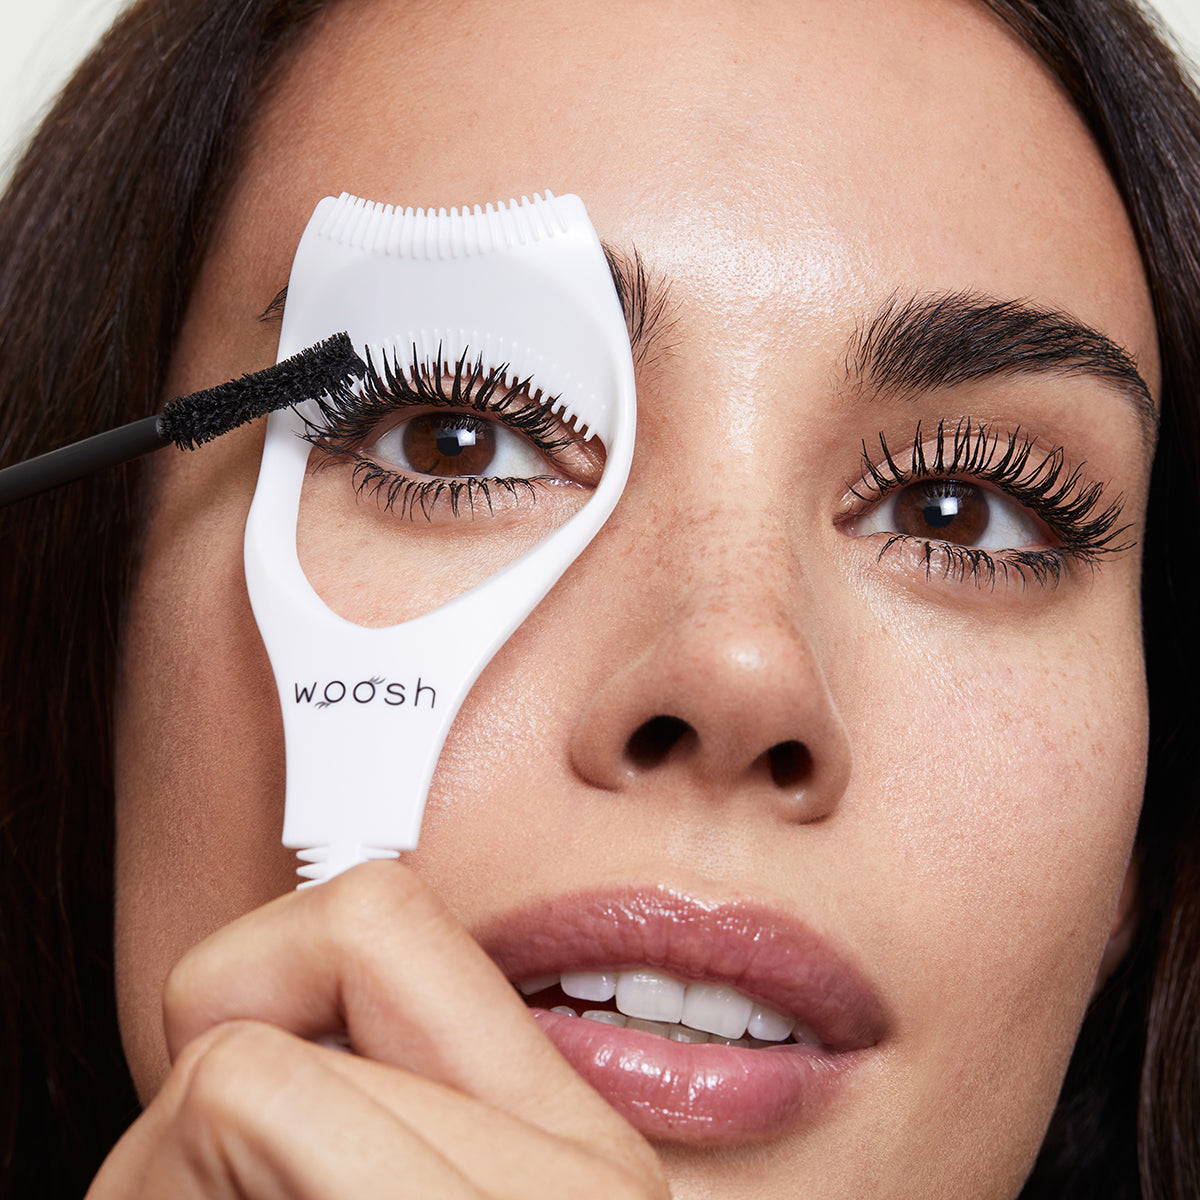 Model using mascara shield on upper lashes as she applies mascara. The shield protects her eyelids from mascara.